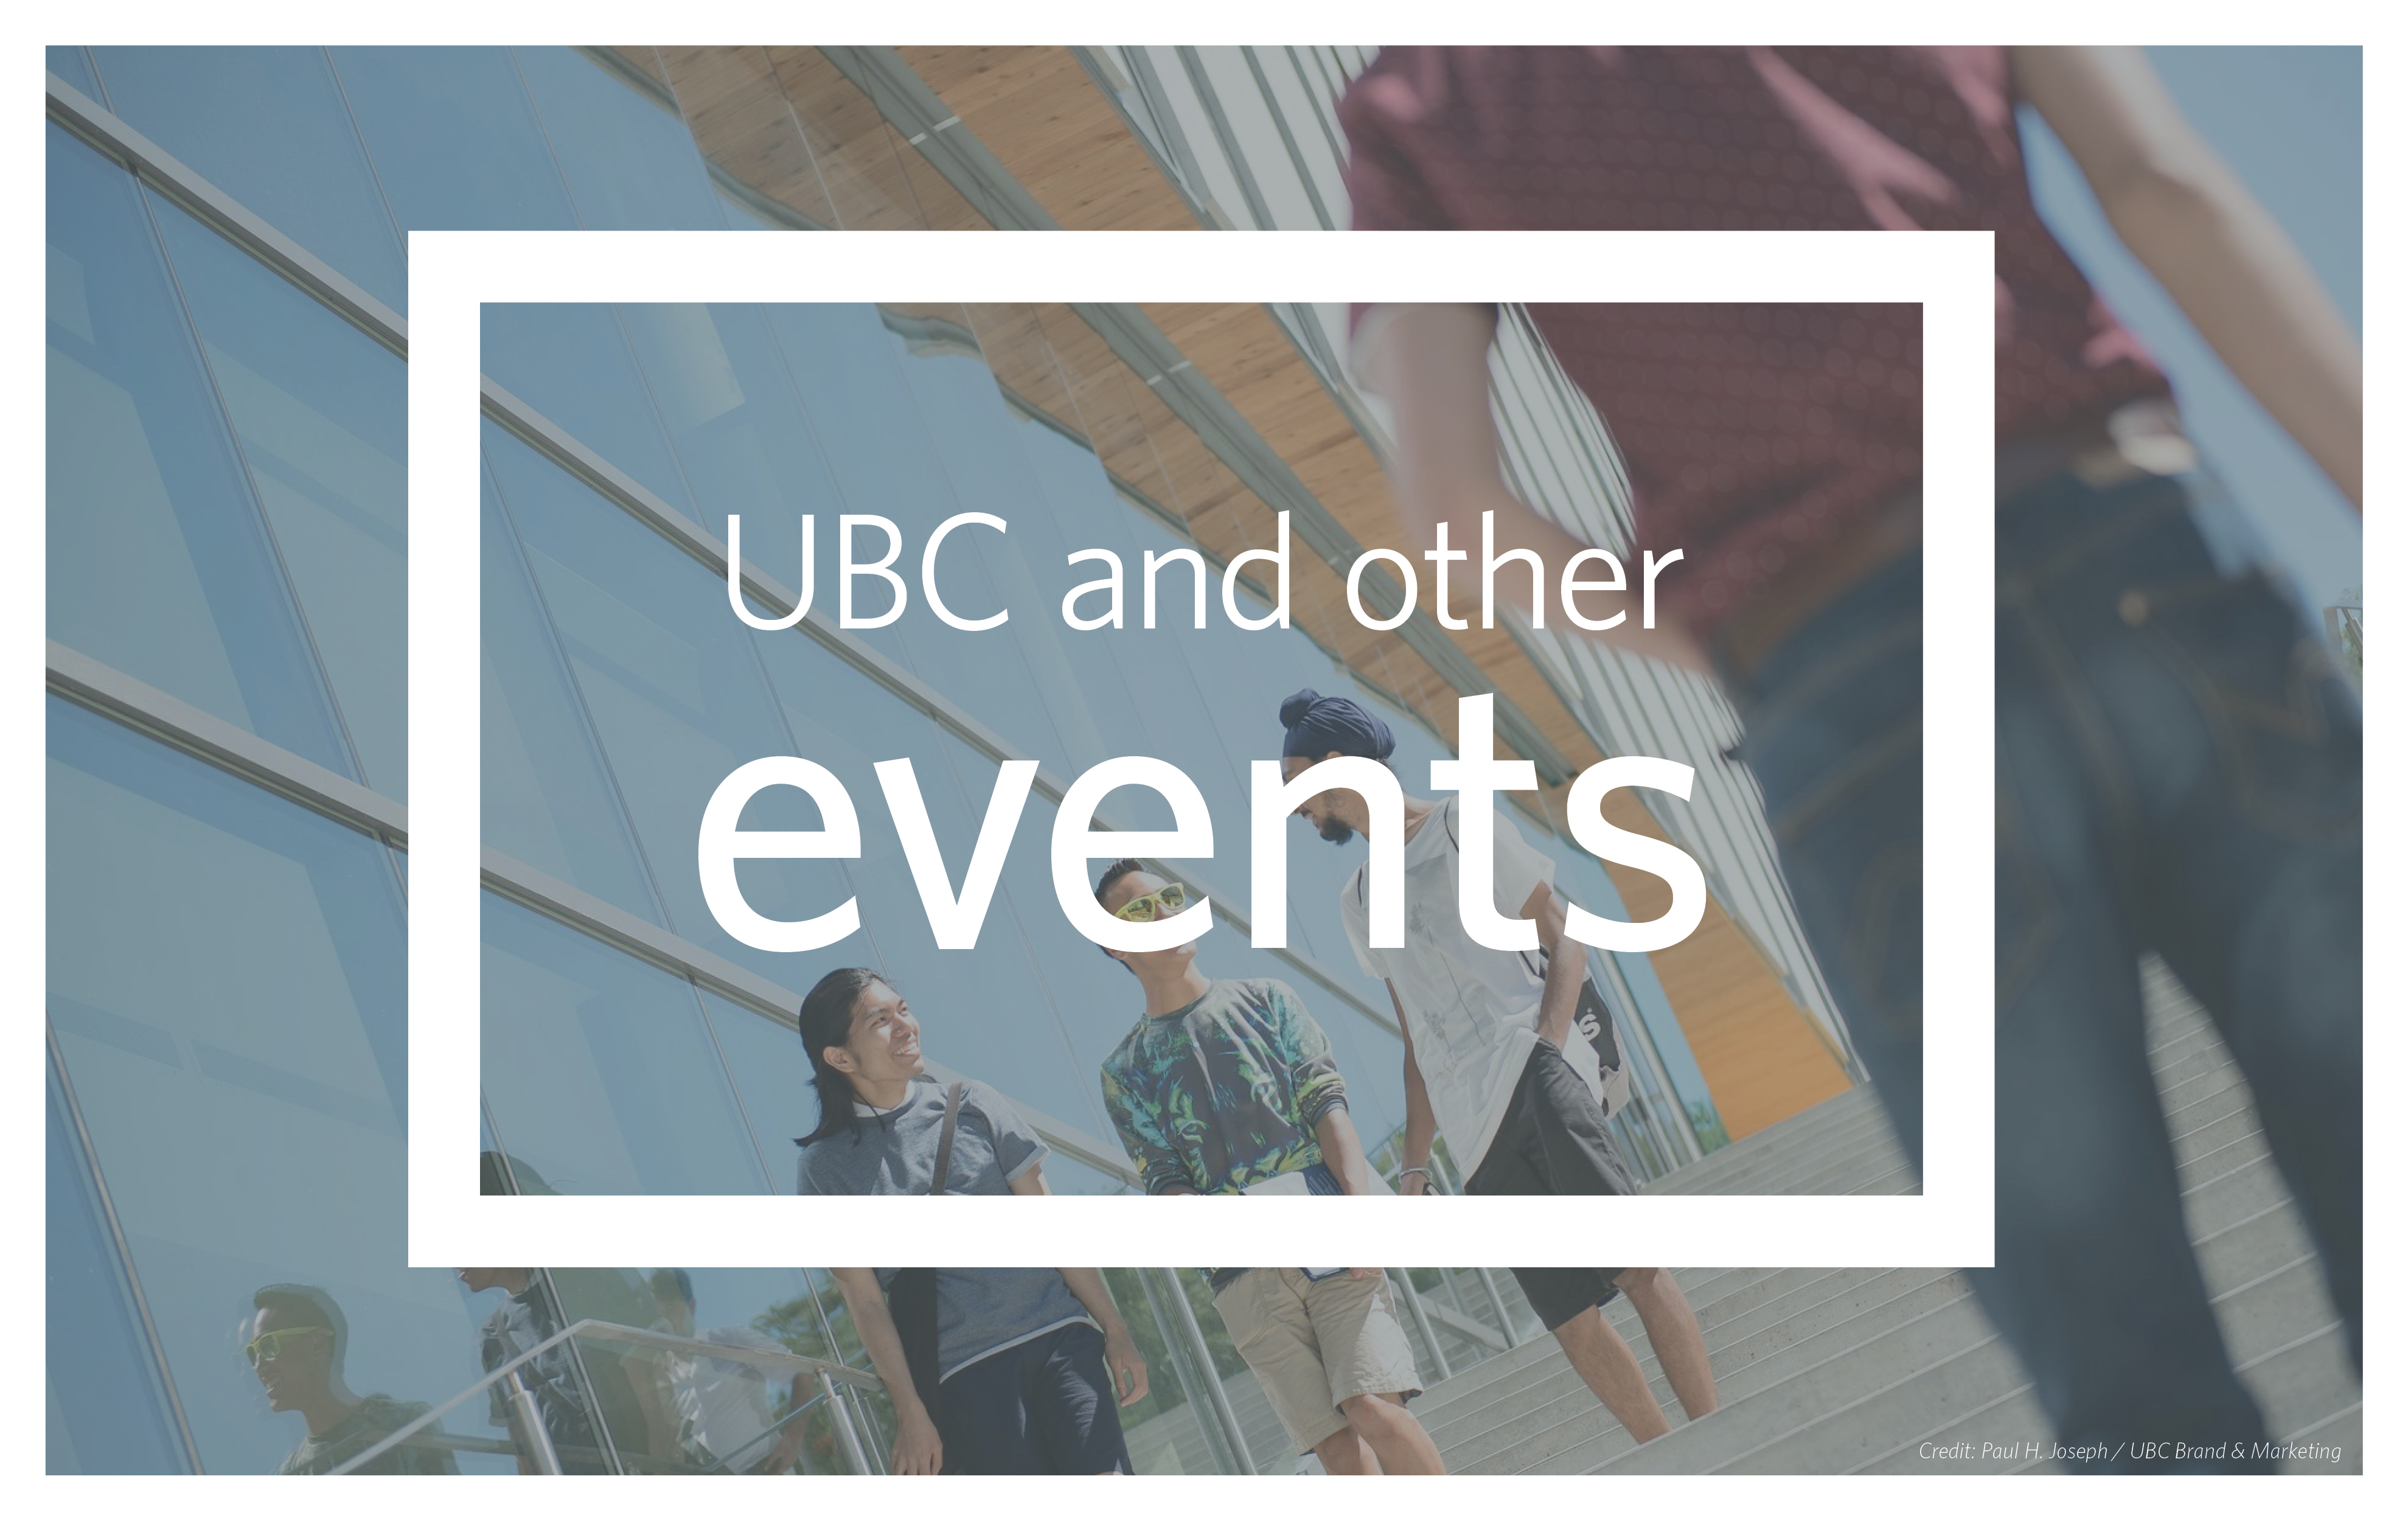 A picture of students talking in front of a building on the UBC Vancouver campus with the text UBC and other events overlaid